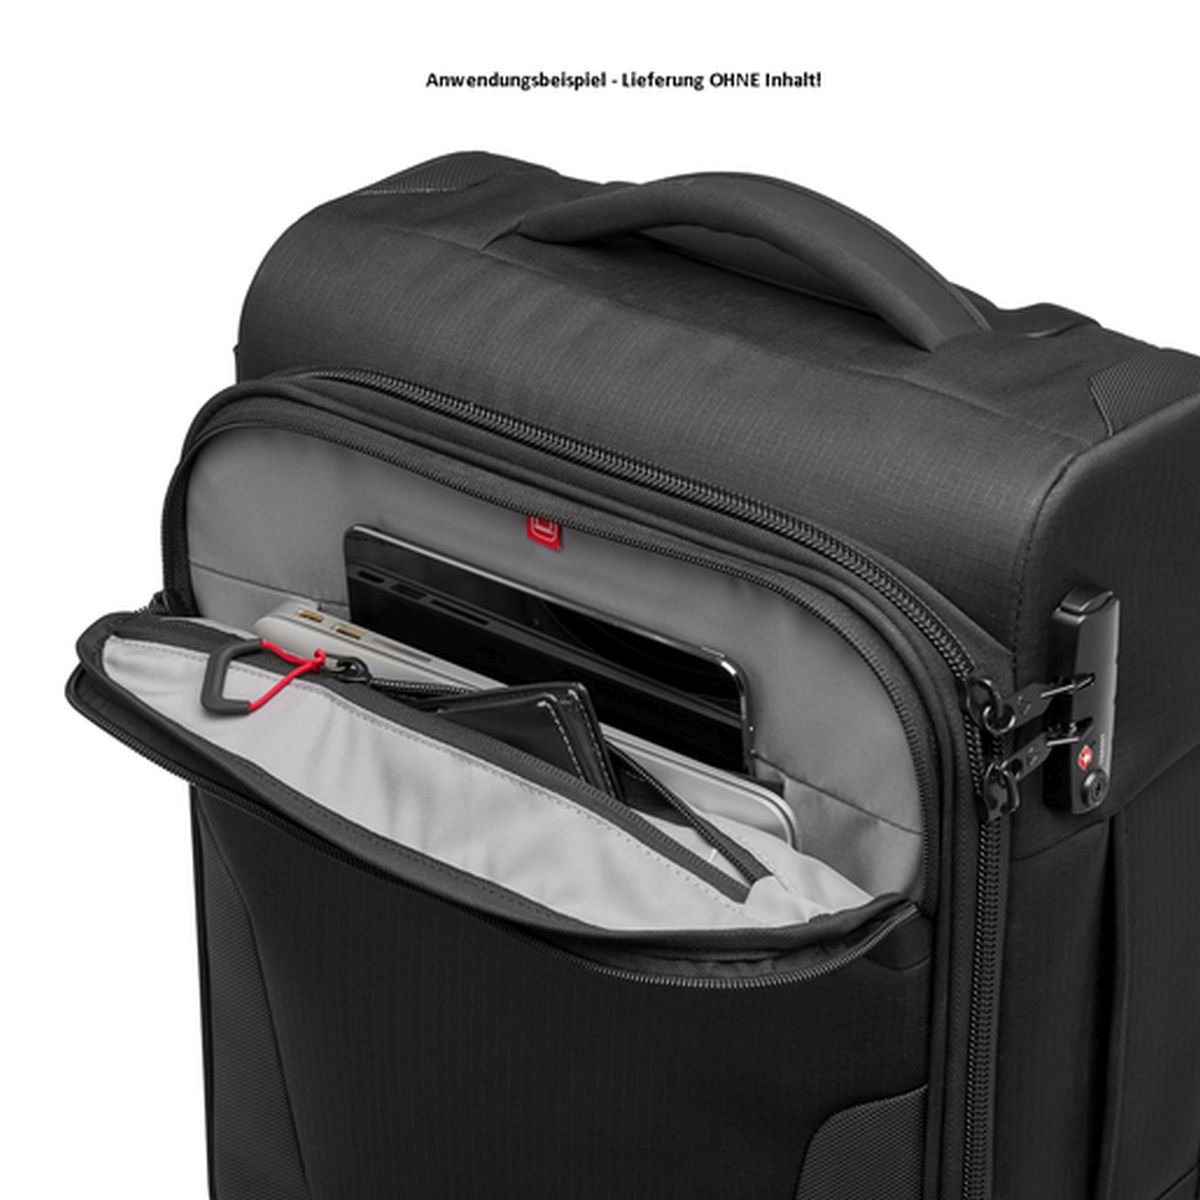 Manfrotto Air-50 Pro Light Trolley